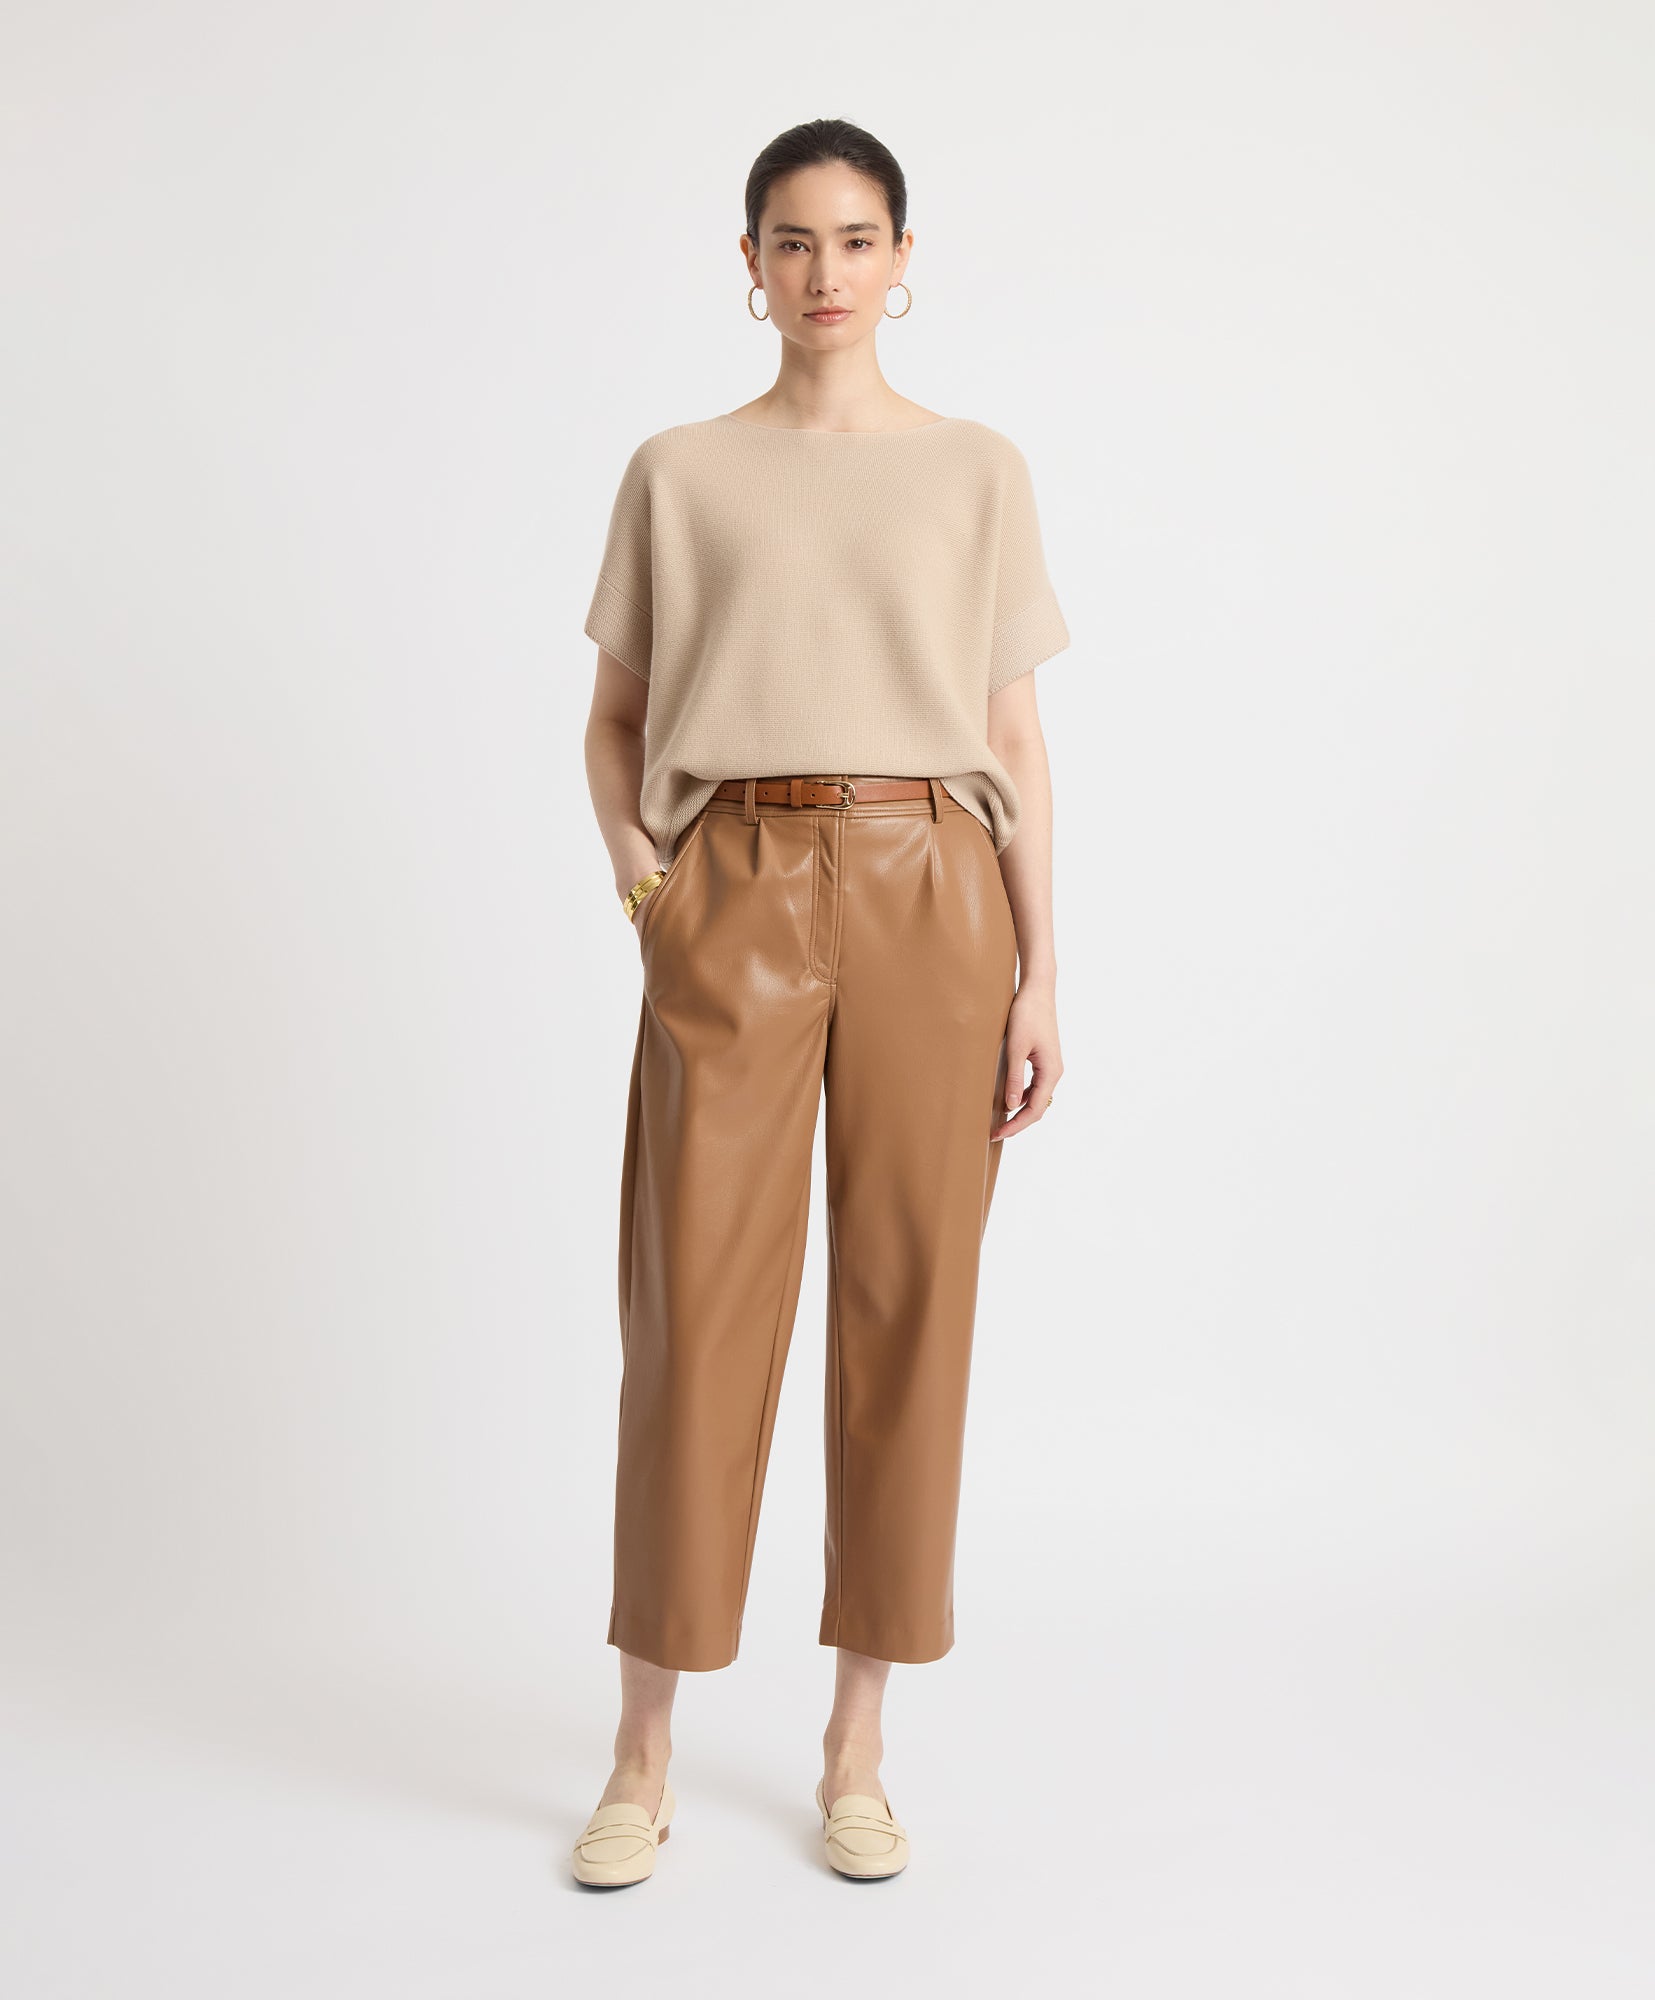 Shop Women's Sweaters & Knits | Cardigans, Pullovers, V-Neck – The Reset